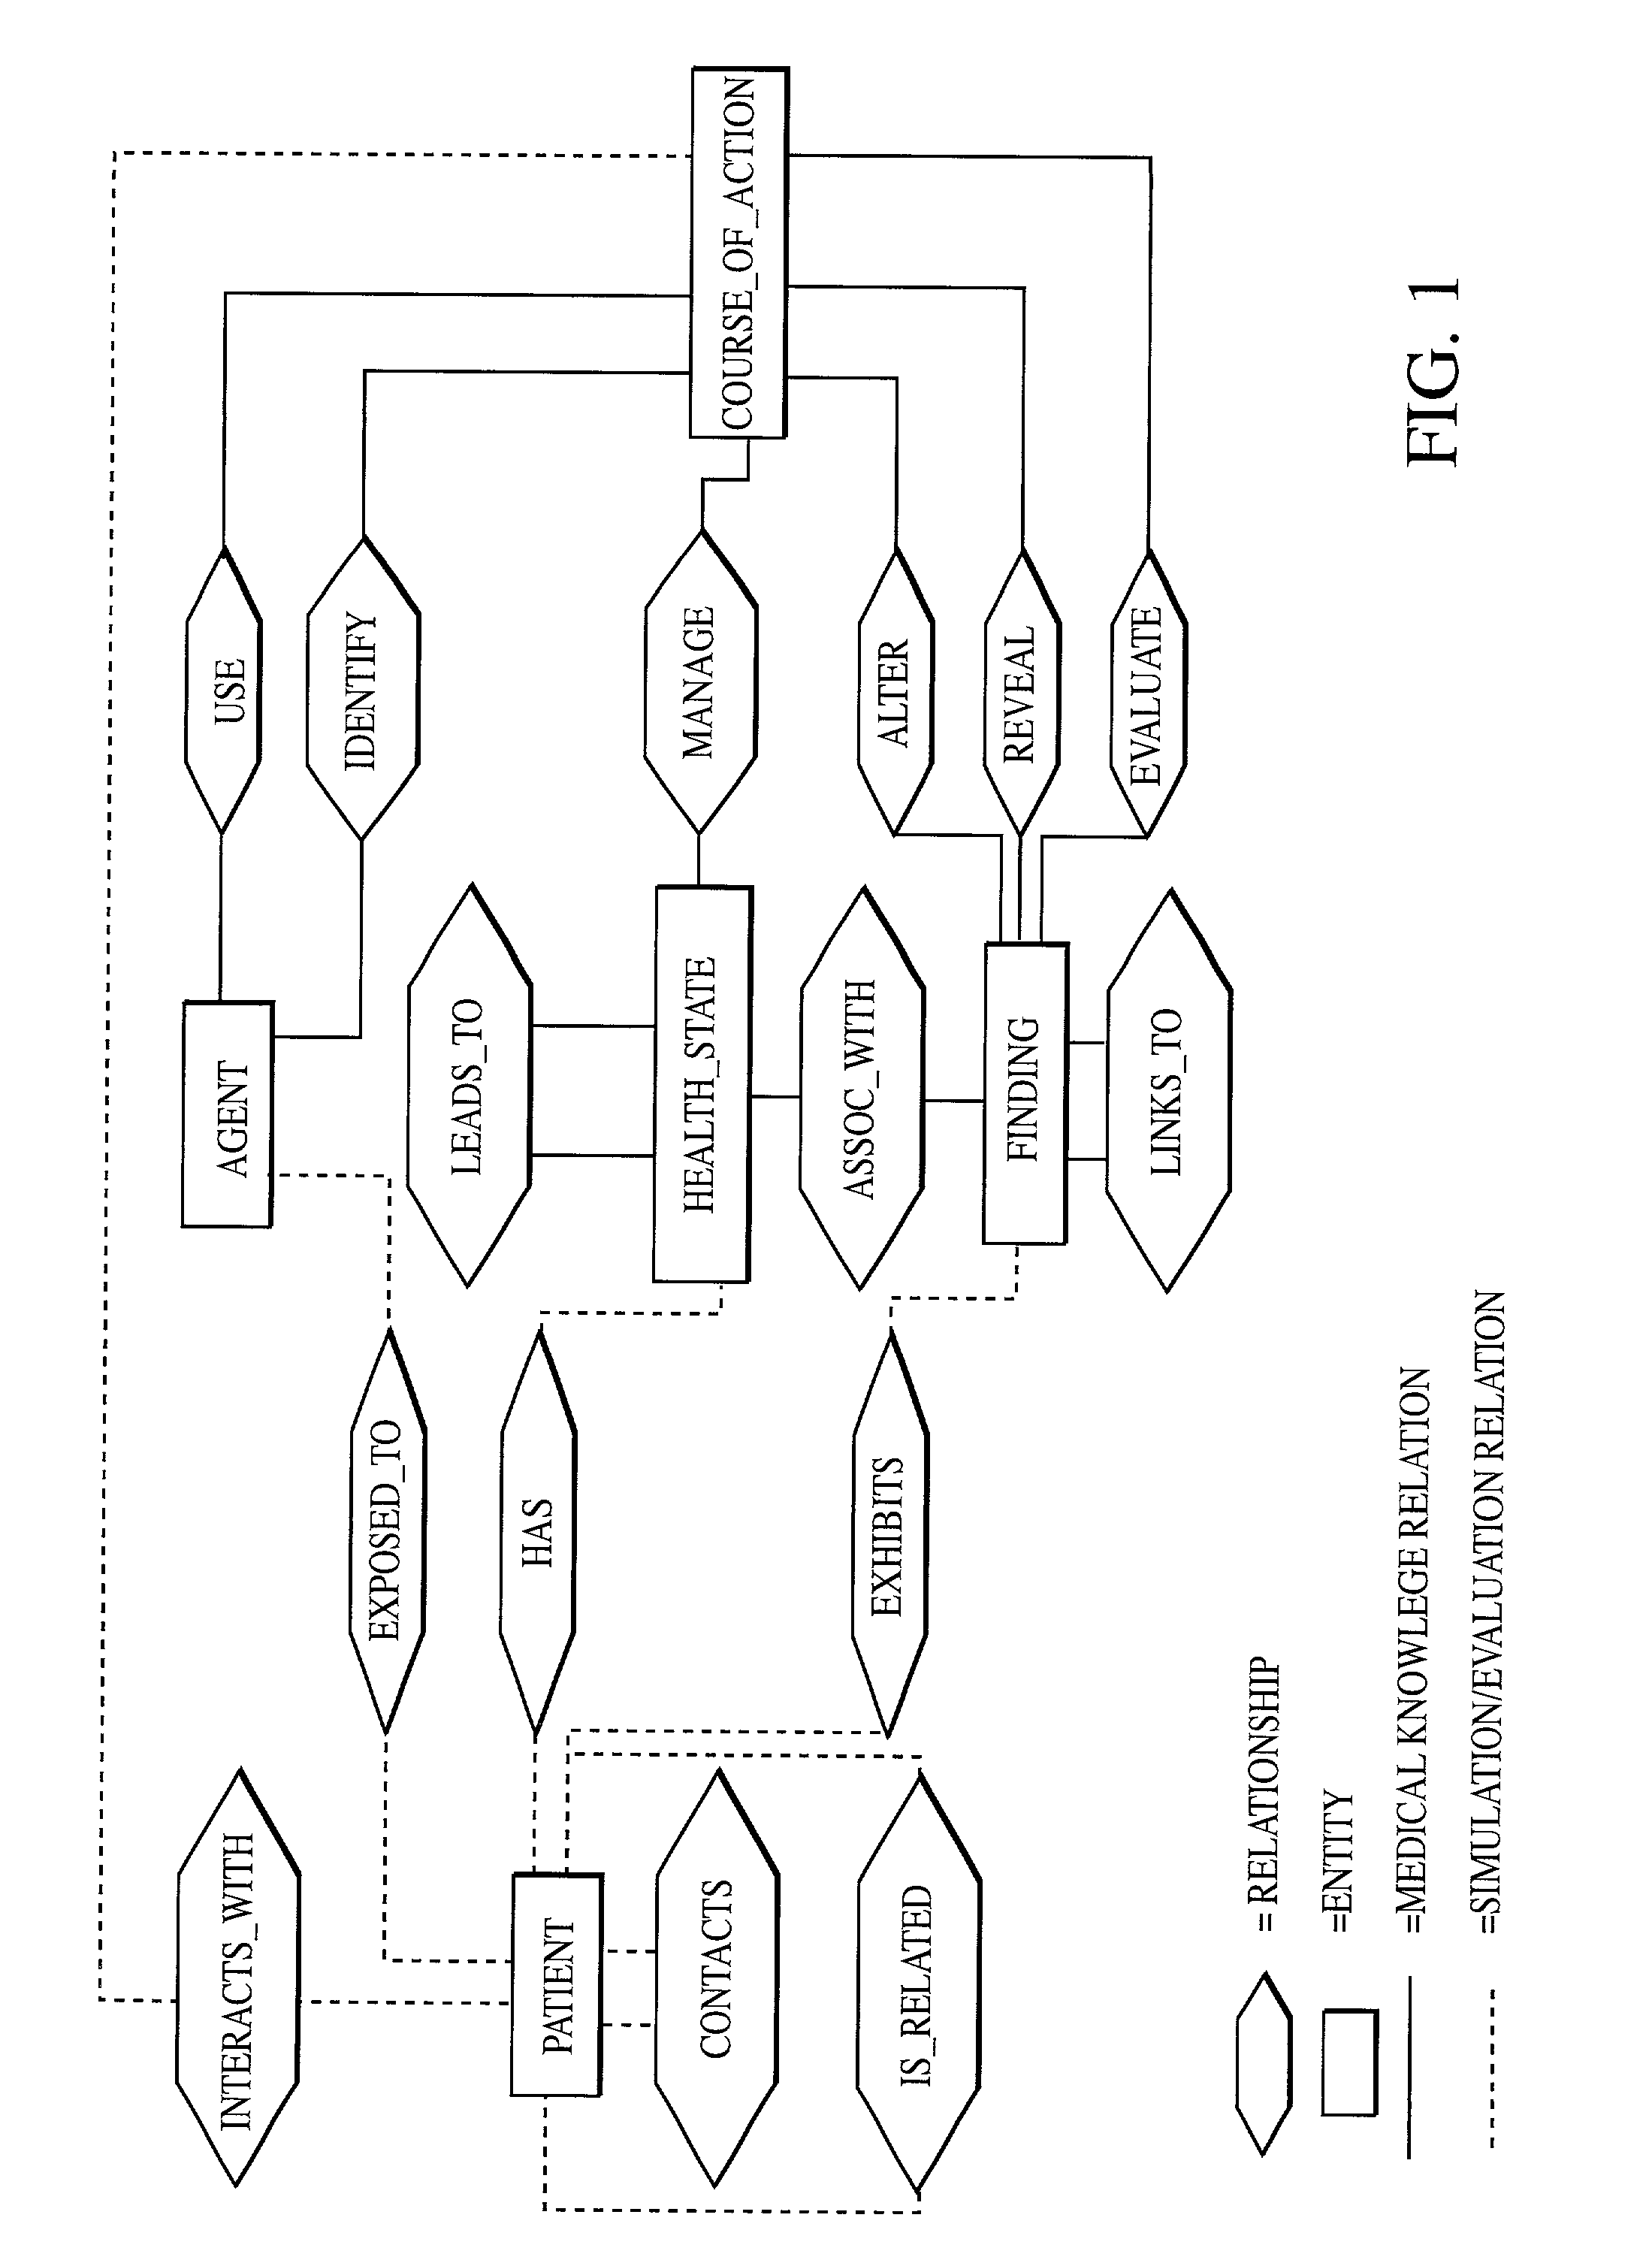 Computer architecture and process of patient generation, evolution, and simulation for computer based testing system